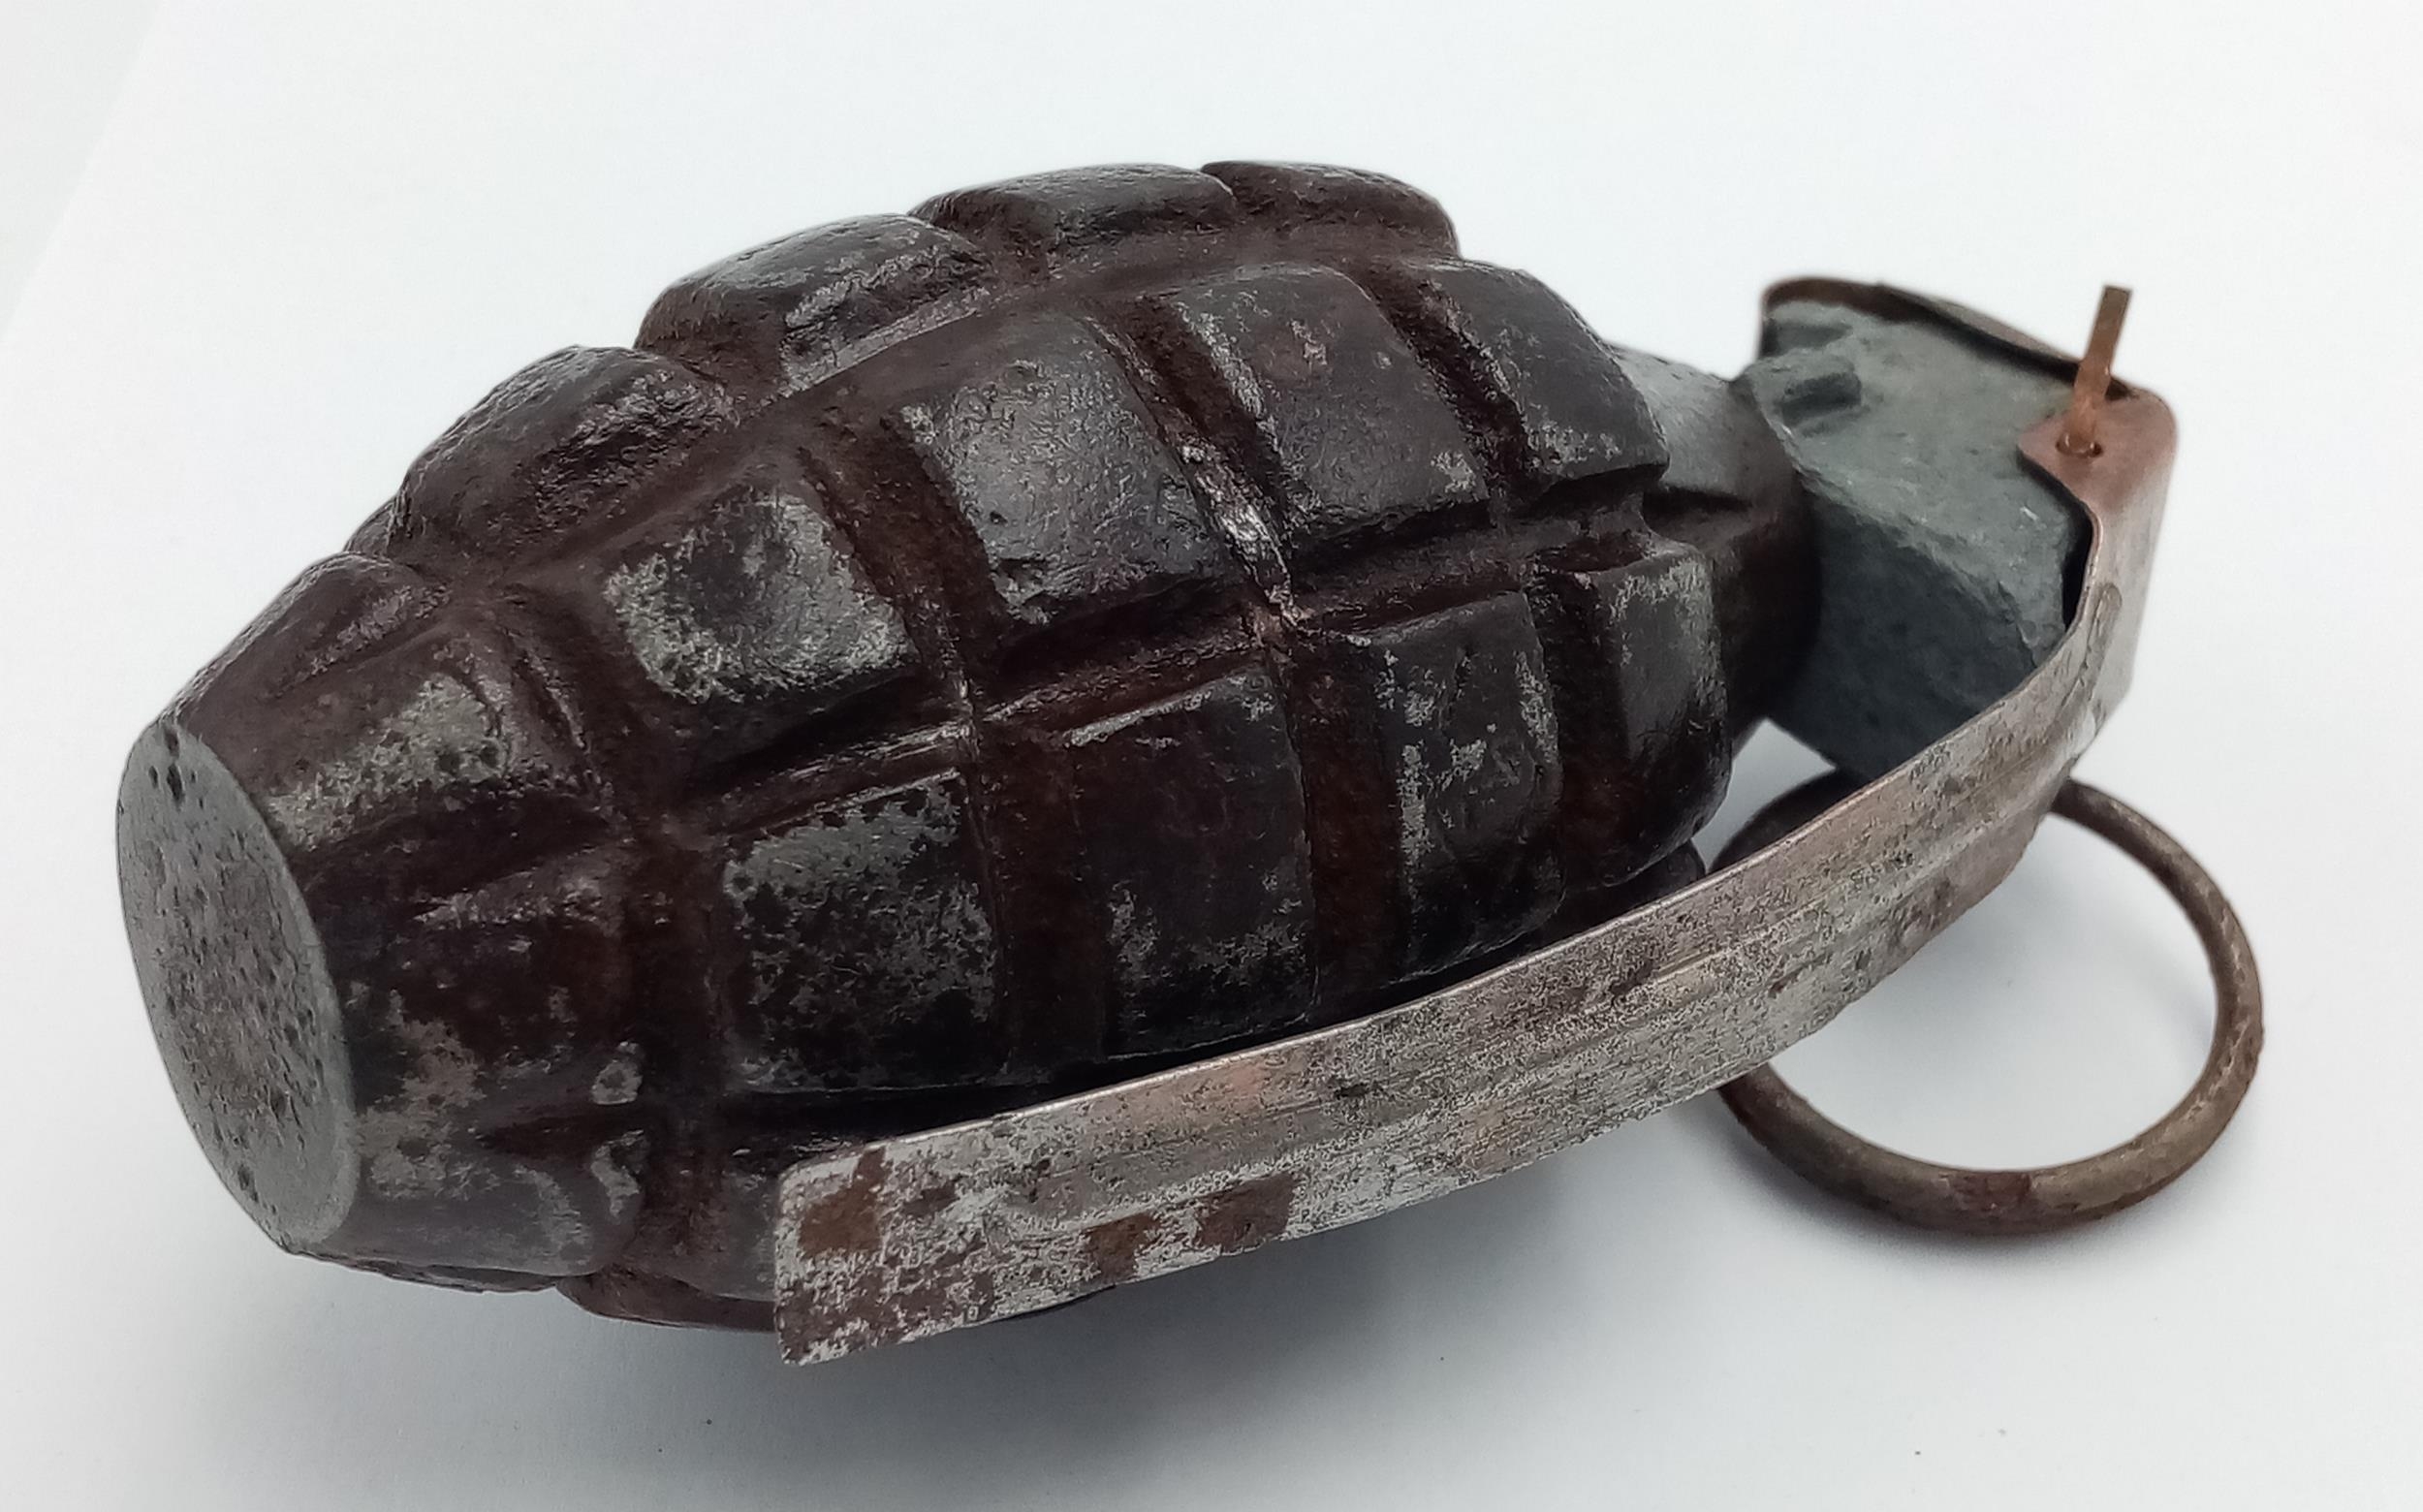 INERT WW2 Normandy Relic US Pineapple Grenade. This Grenade is one of several that were found in the - Image 4 of 5